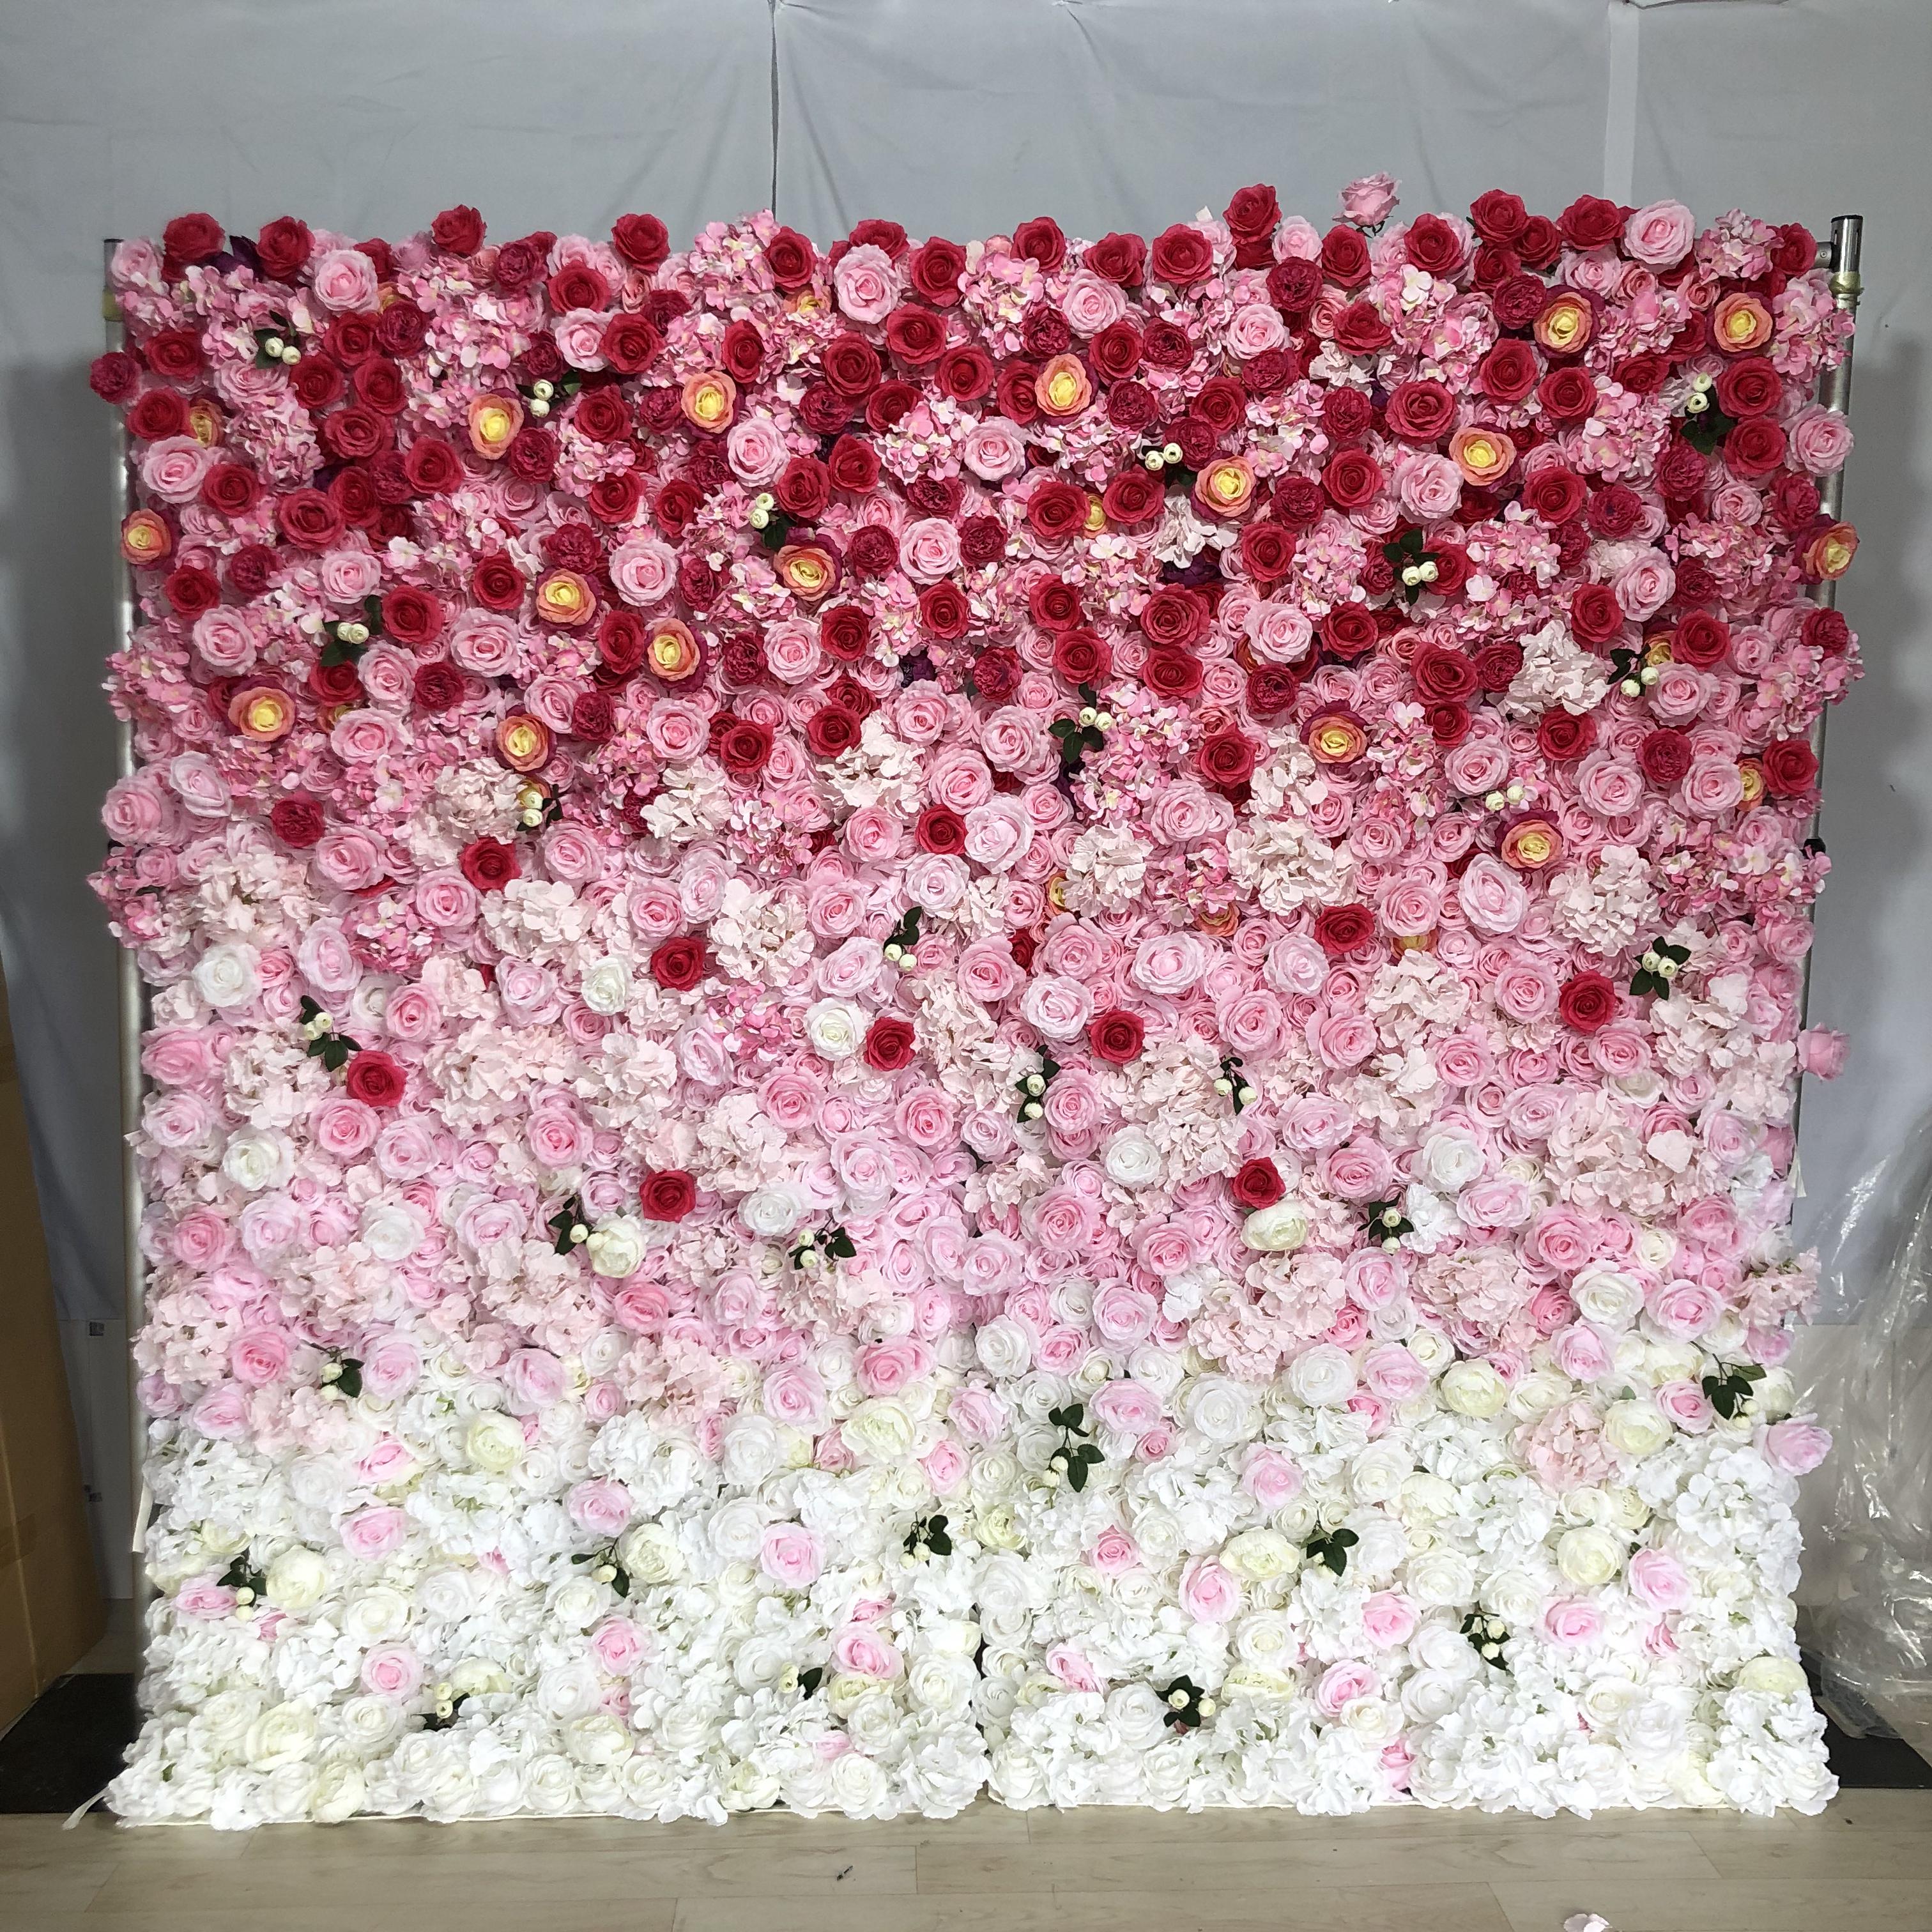 Flower Wall Gradient Pink White Fabric Rolling Up Curtain Floral Backdrop Wedding Party Proposal Decor